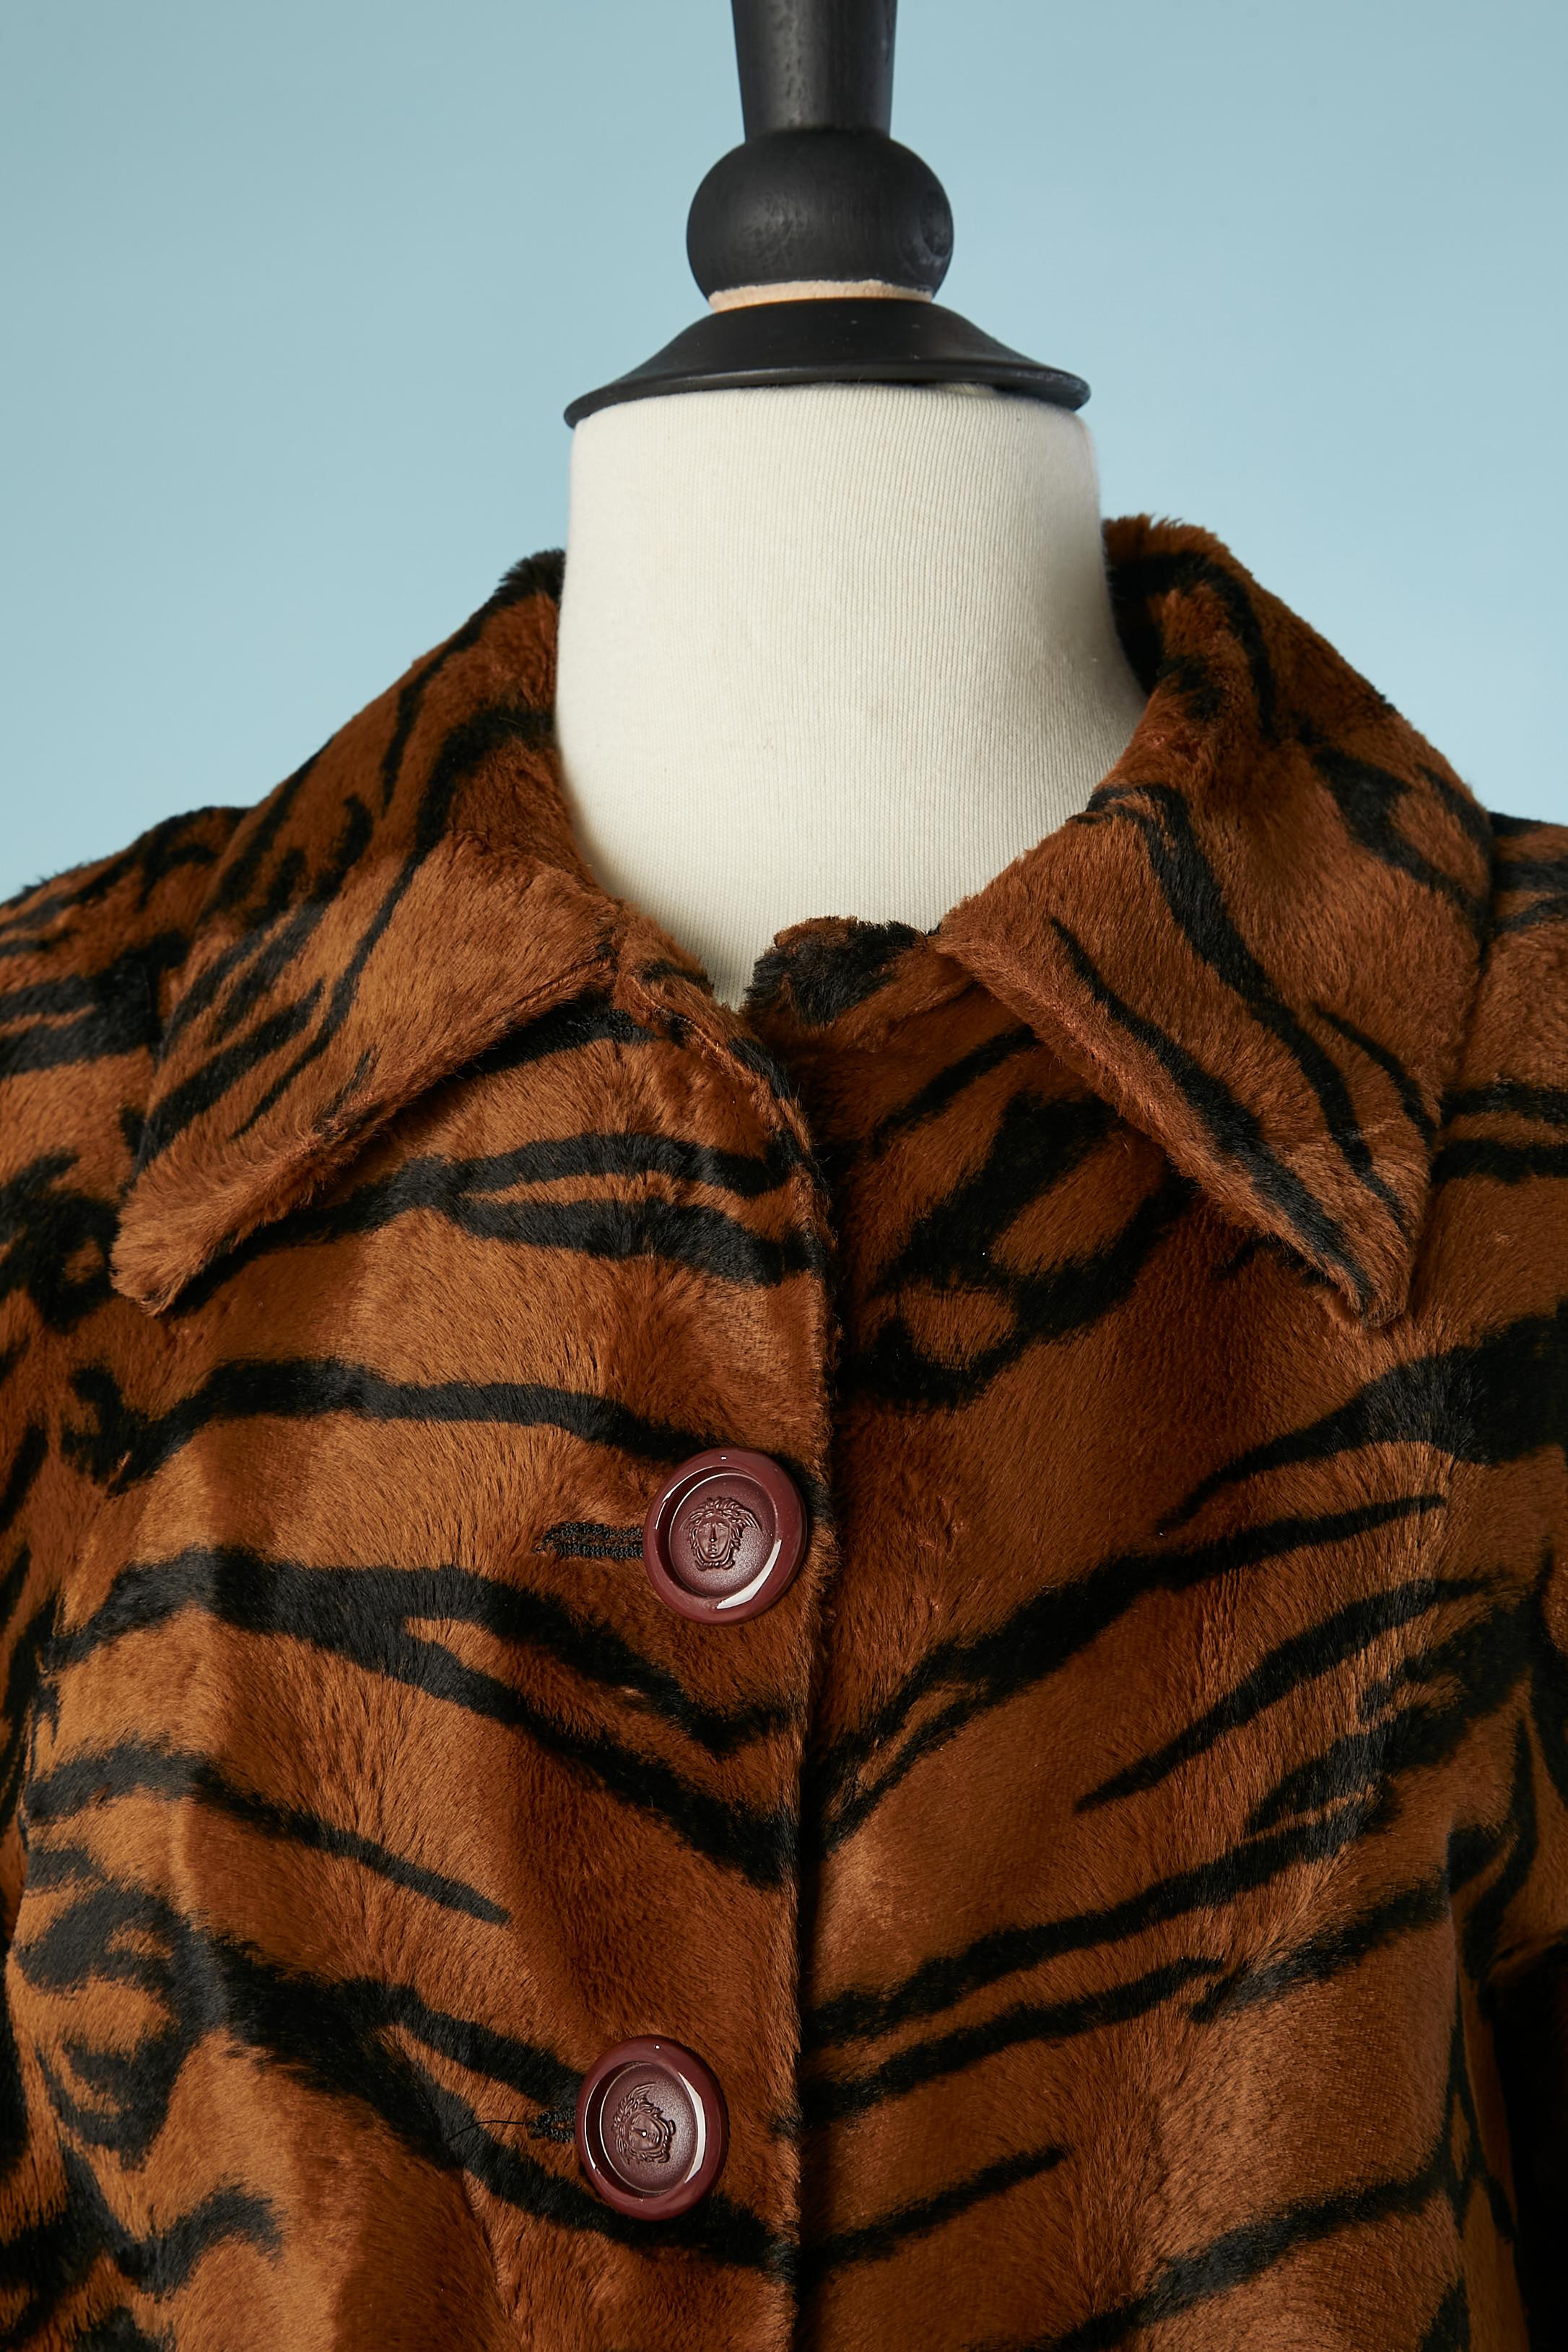 Tiger printed faux- furs single-breasted jacket . Slightly quilted. Branded Medusa buttons. Authenticity hologram. Top button is missing.
SIZE S